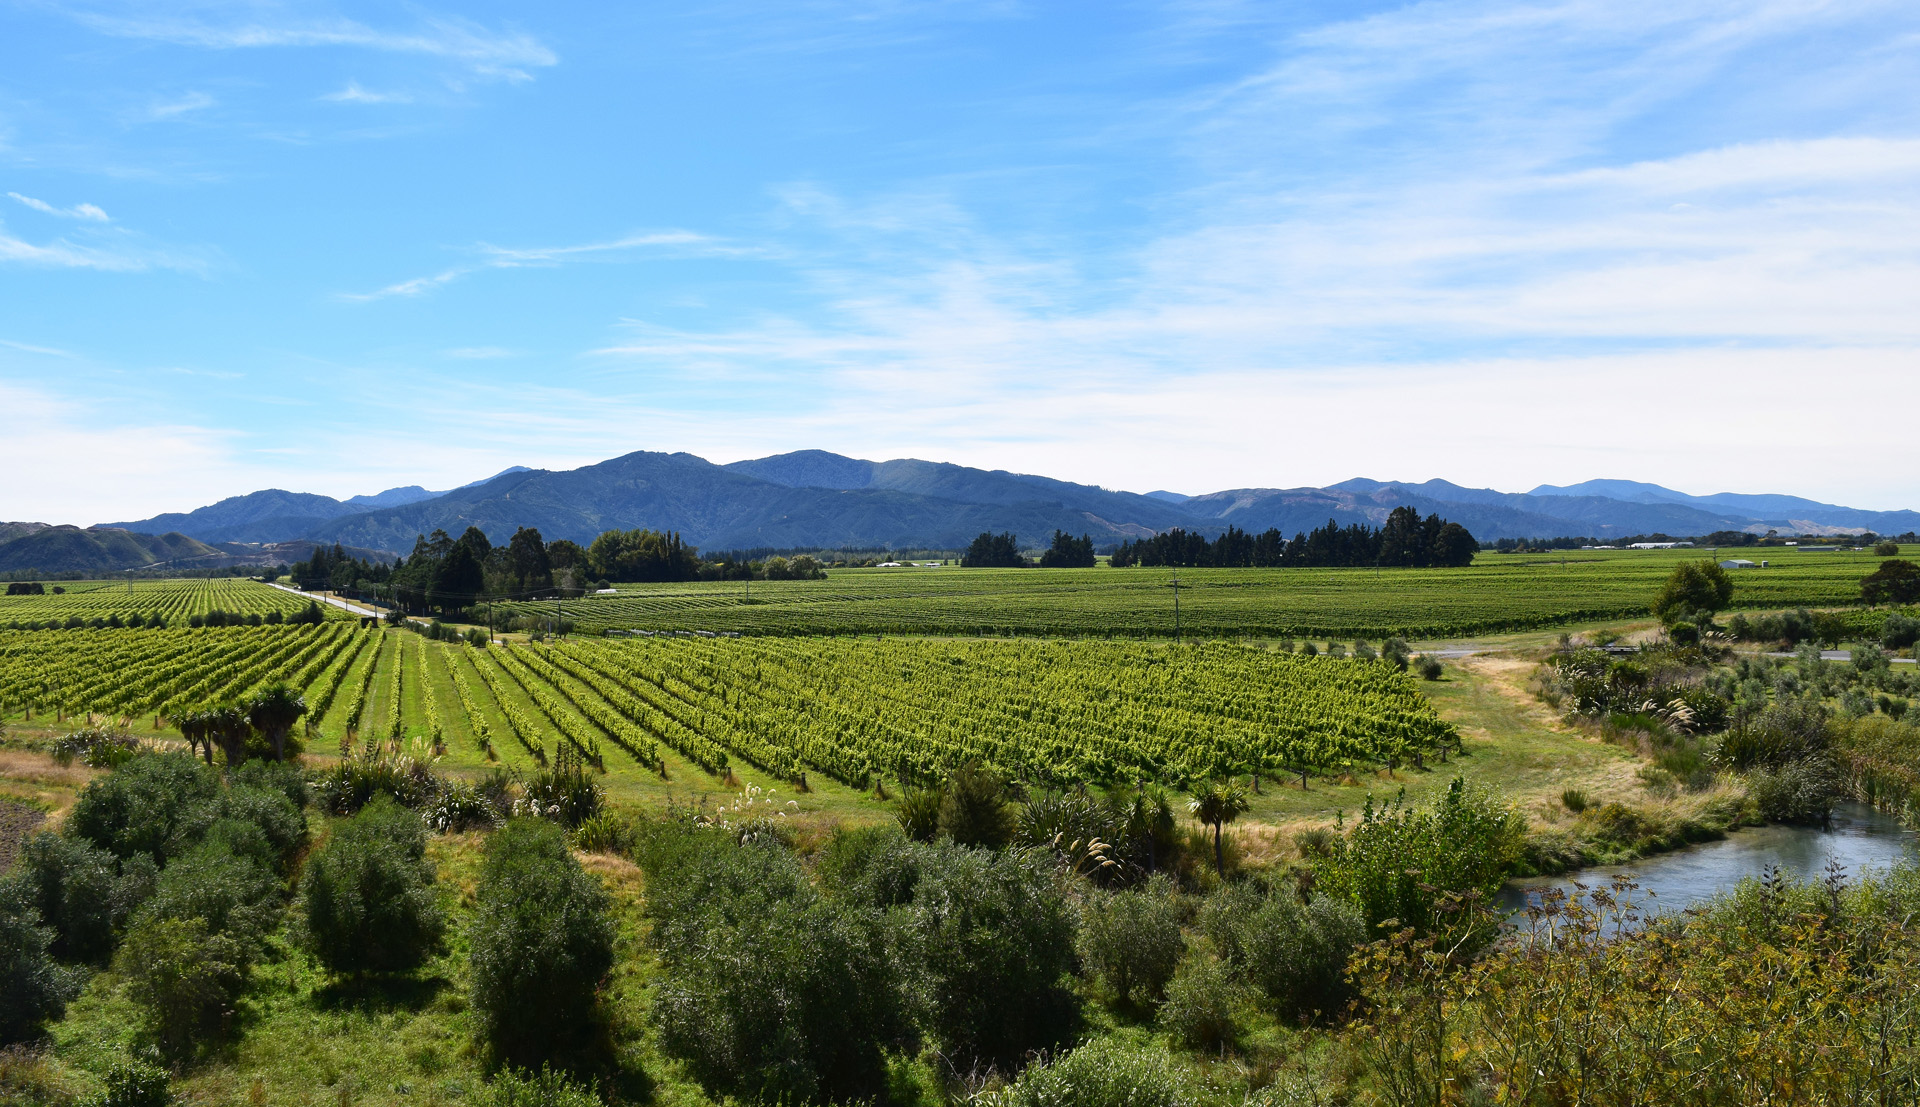 New Zealand's version of Napa Valley is the expansive Marlborough region, which produces 66% of the country's wine and is the home of famous Cloudy Bay.